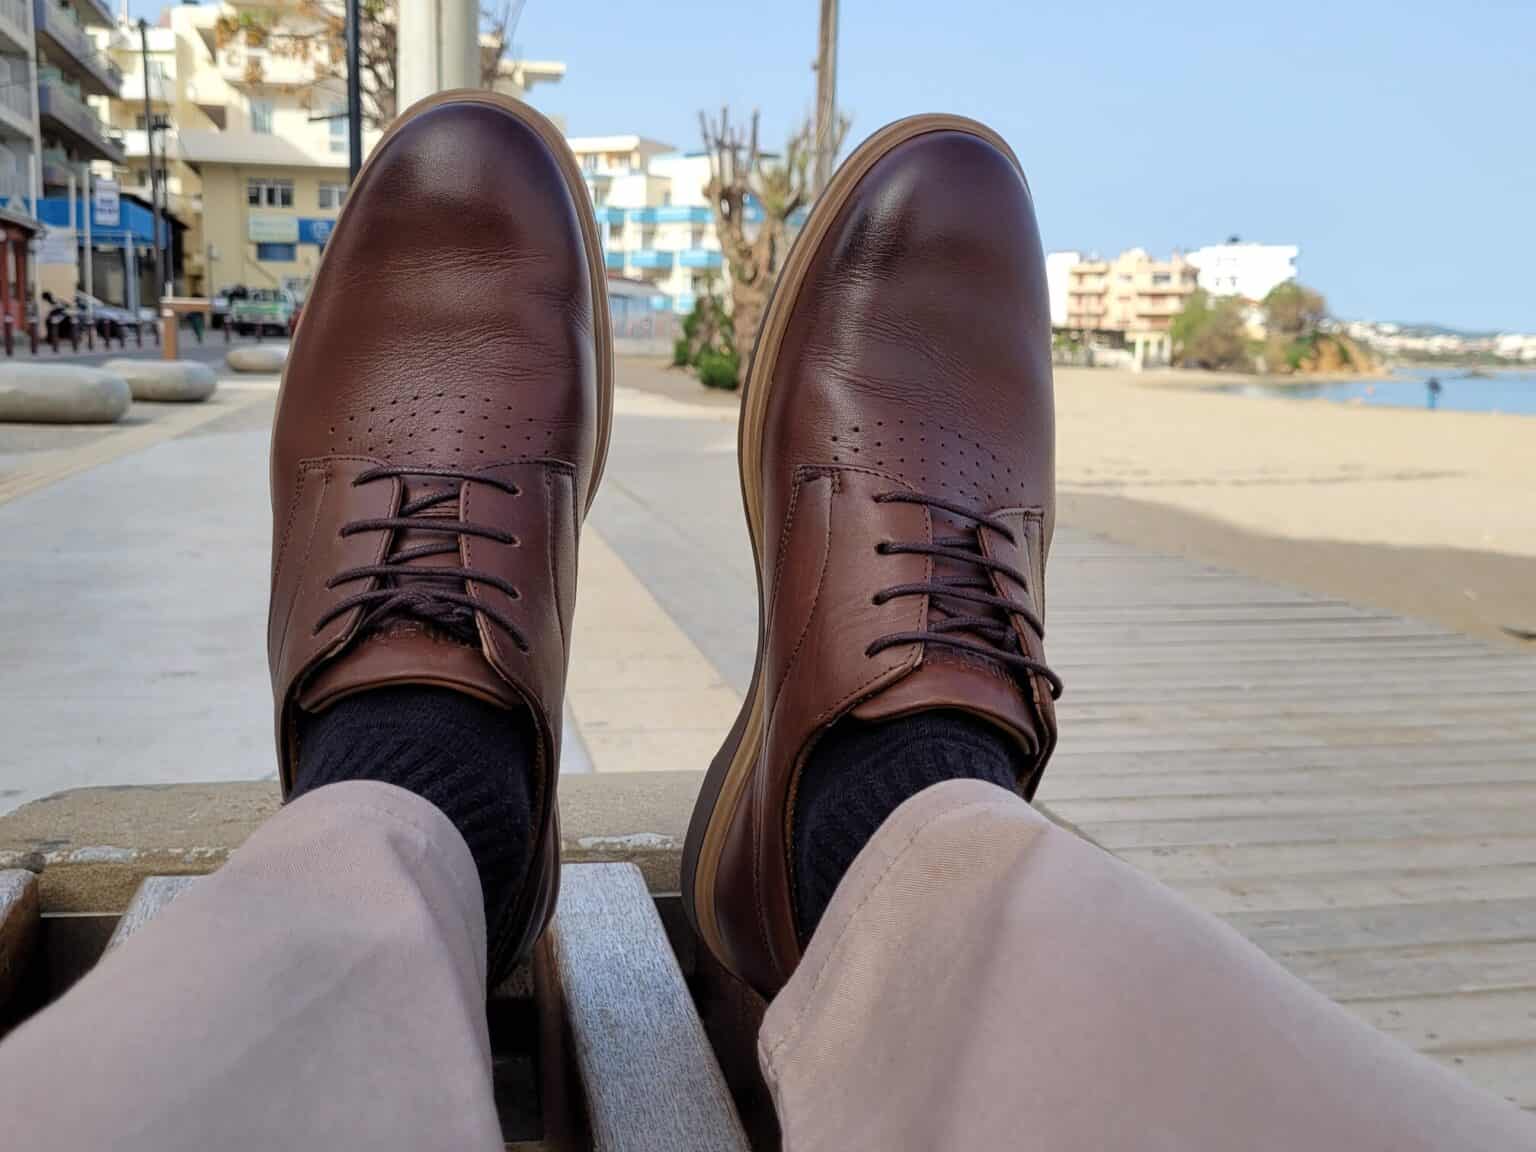 Amberjack Shoes Review Are They Comfortable? The Men Hero